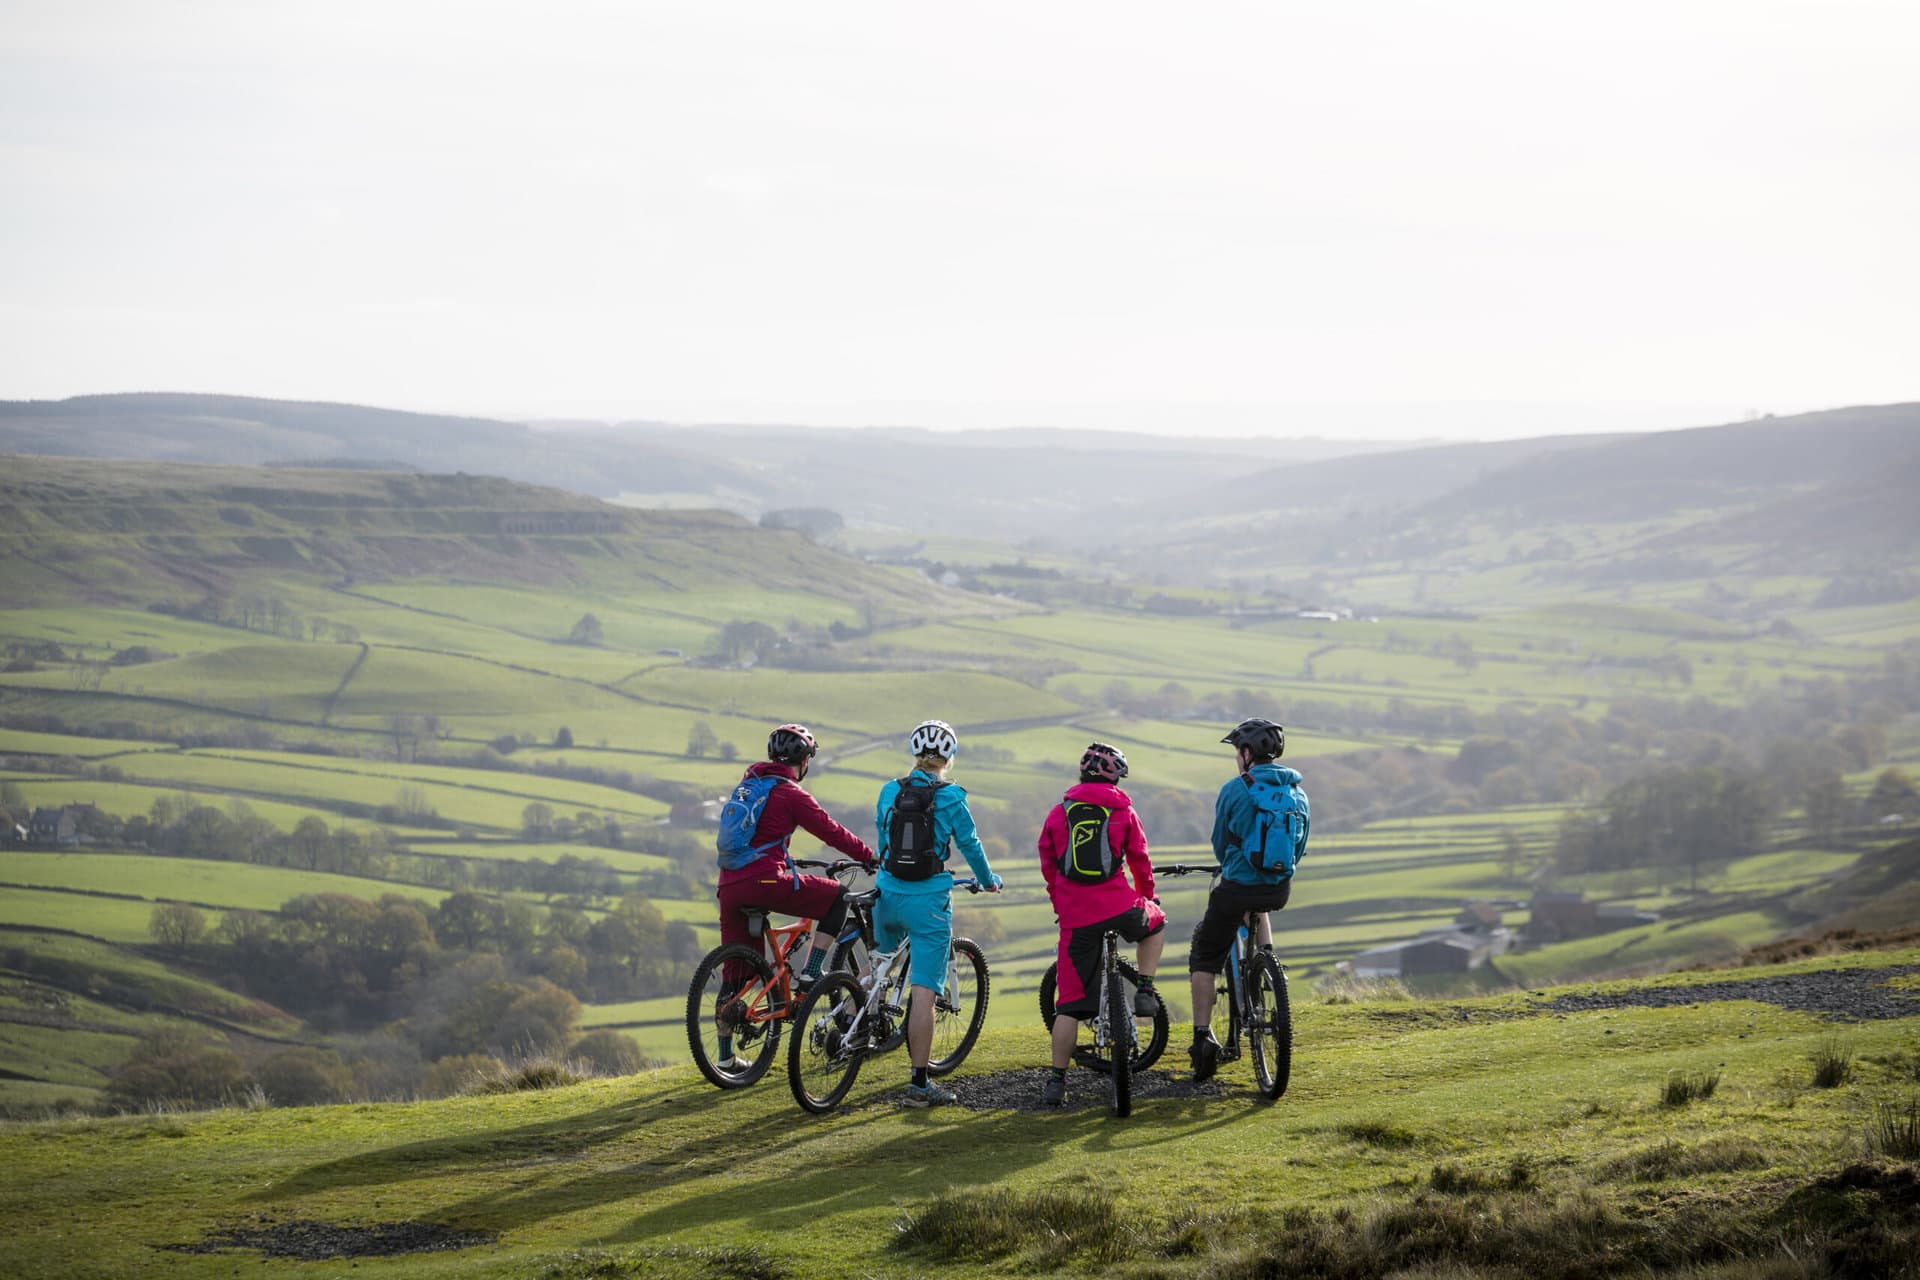 Cycling in North Yorkshire, mountain biking, road biking, yorkshire, north yorkshire, dalby forest, cliff house, holiday cottages, bike store, storage, bike